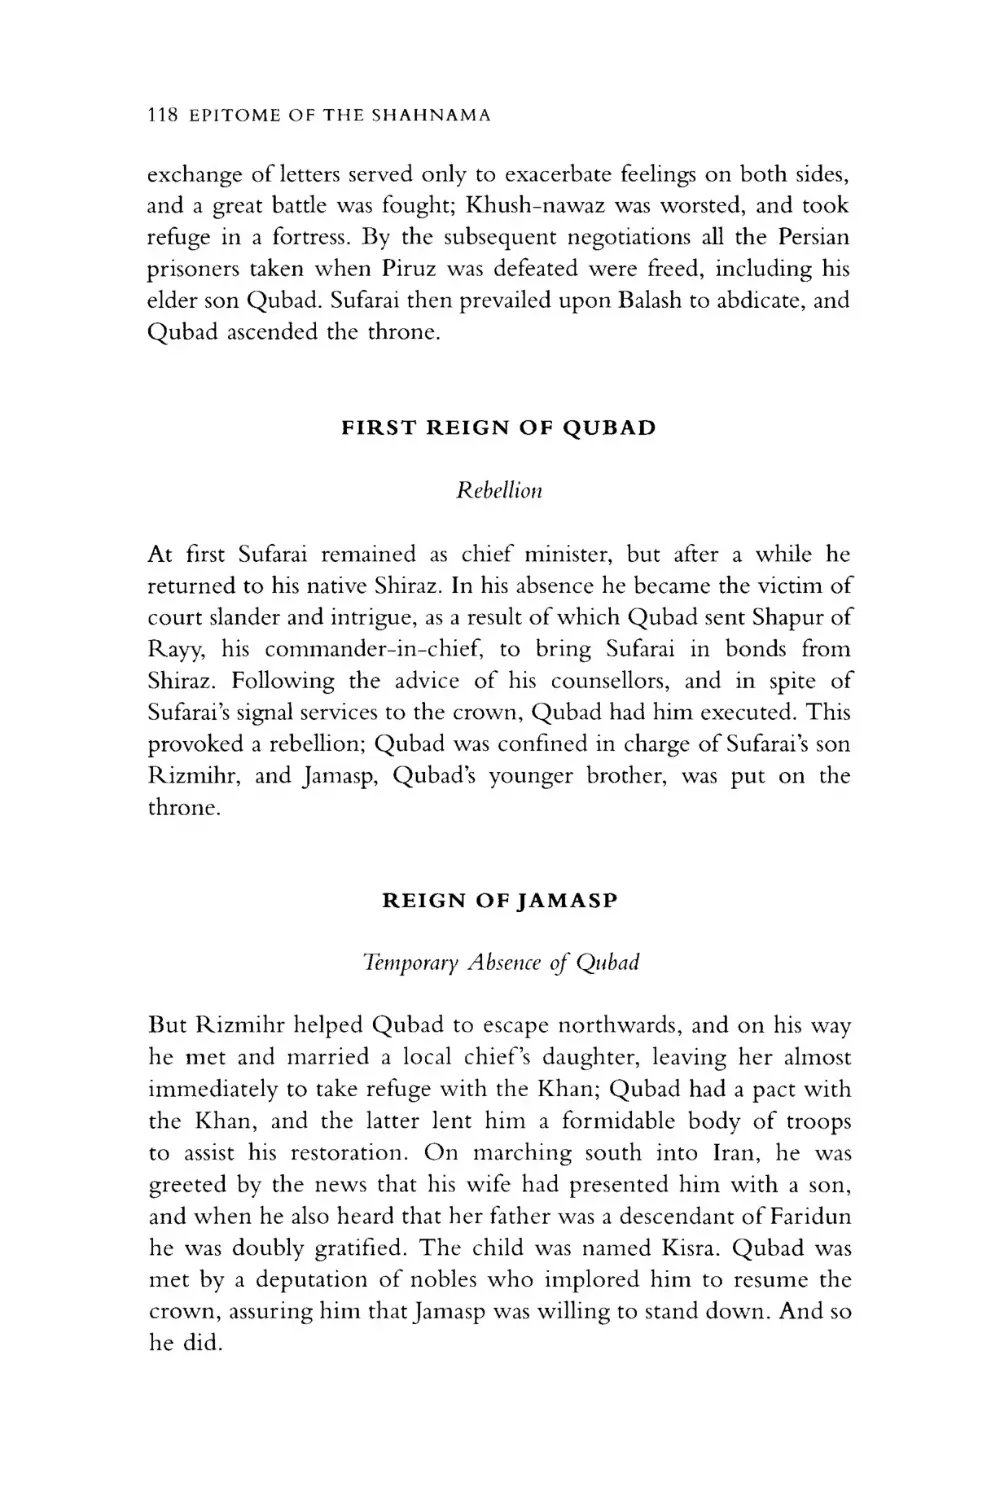 FIRST REIGN OF QUBAD
Rebellion
REIGN OF JAMASP
Temporary Absence of Qubad